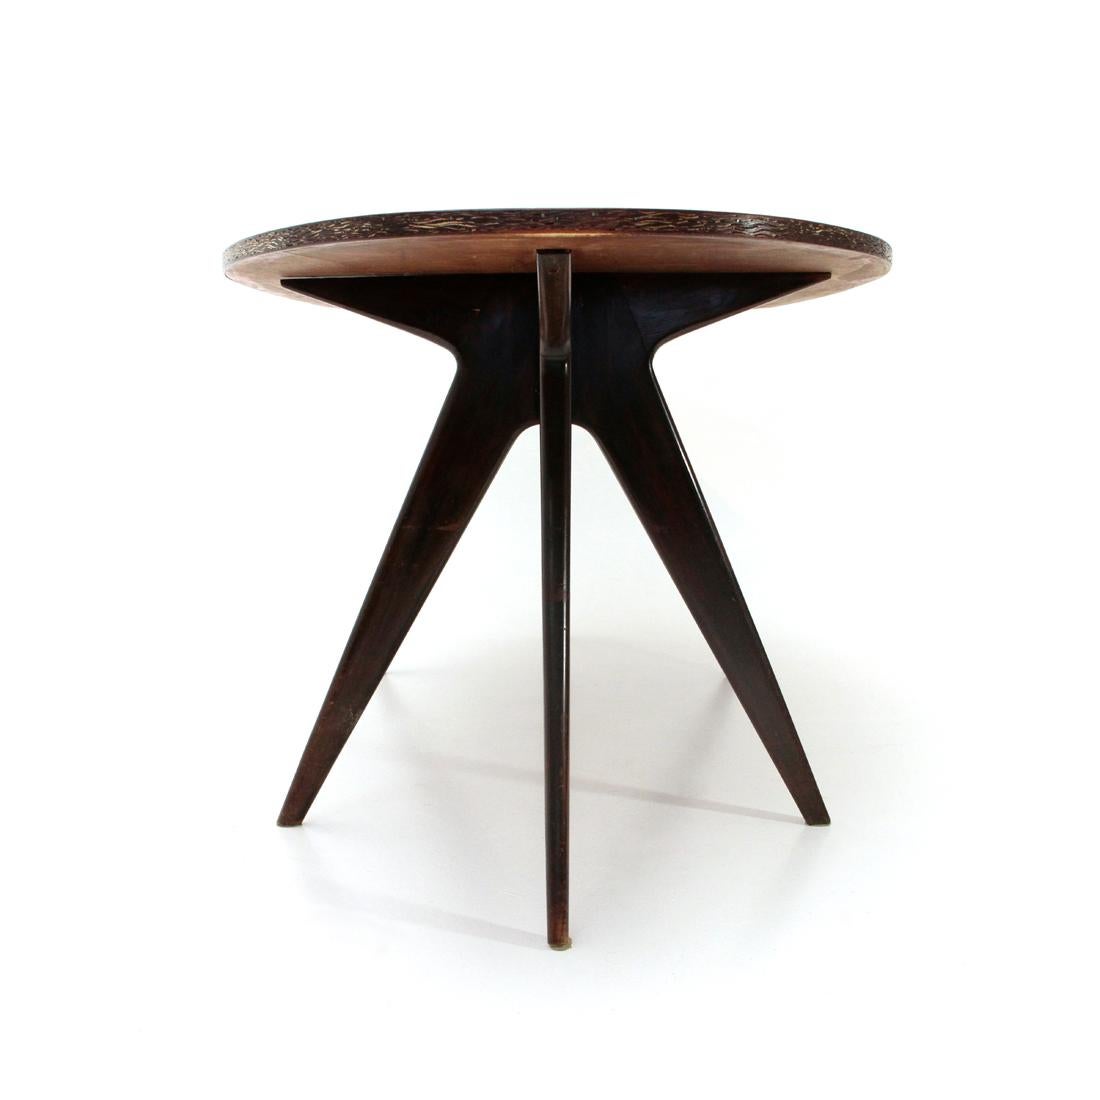 Wood Italian Midcentury Dining Table with Oval Top, 1950s